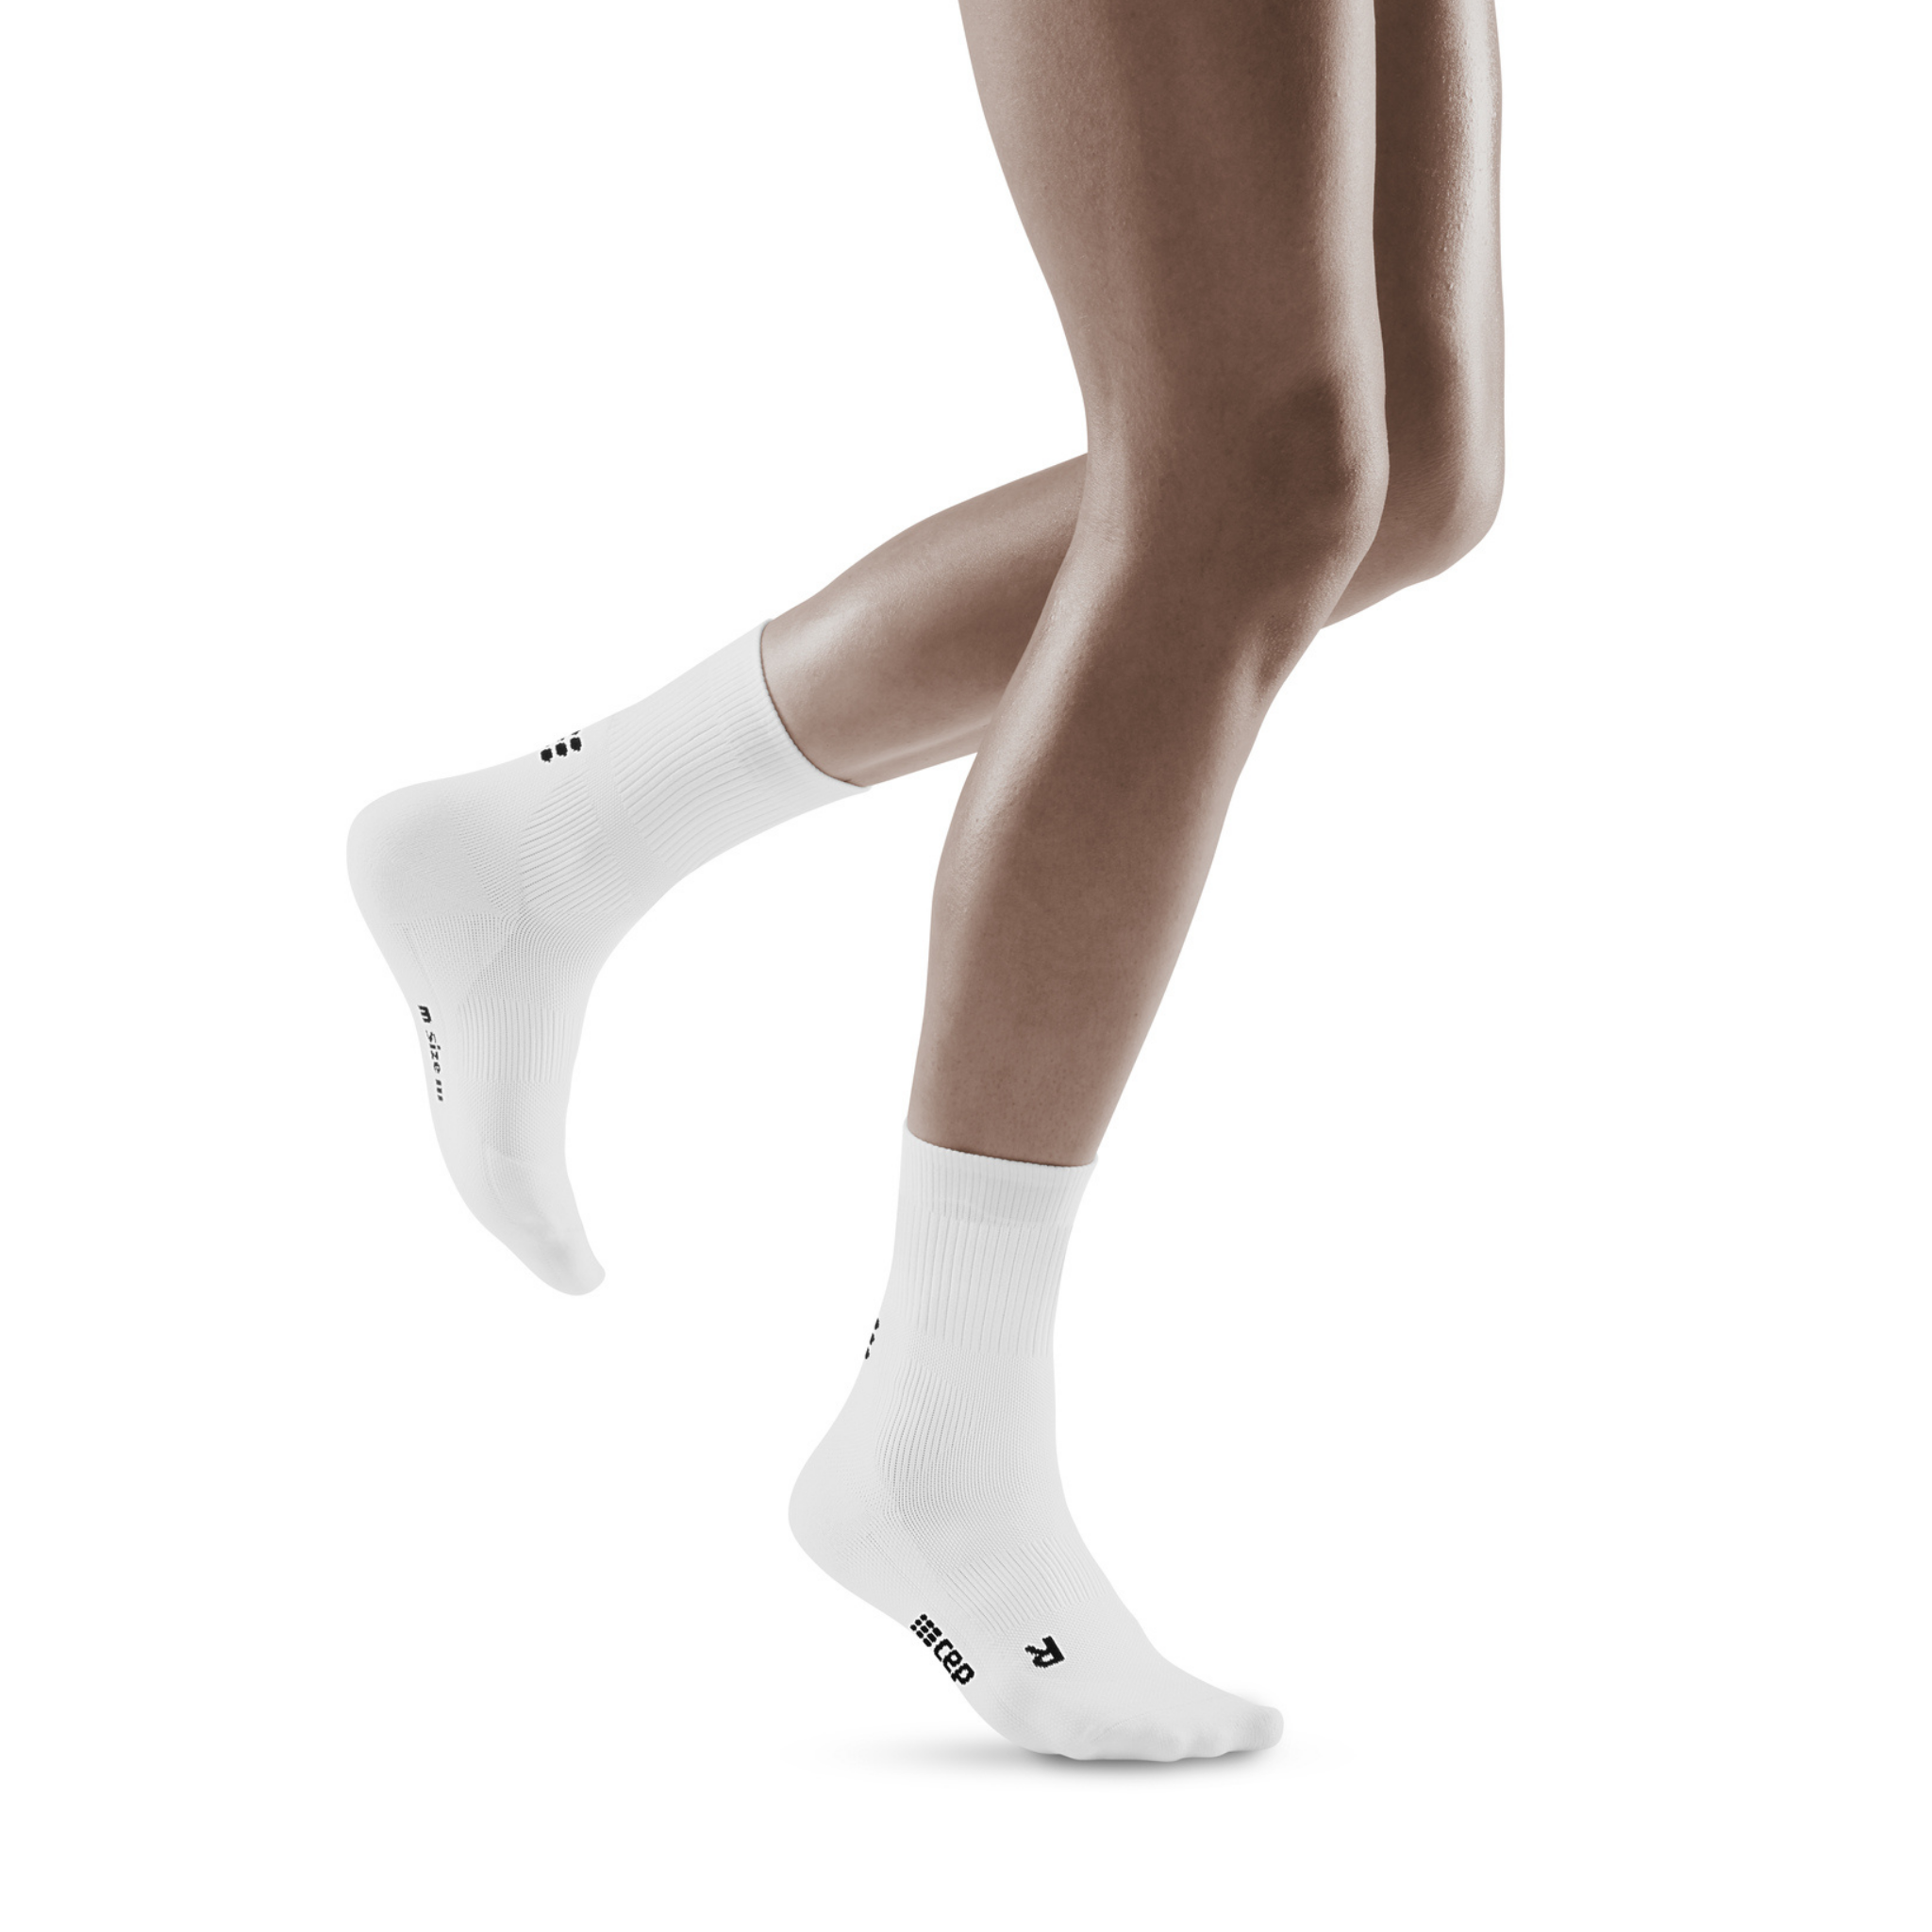 CEP Ultralight Compression Socks Low Cut in white buy online - Golf House